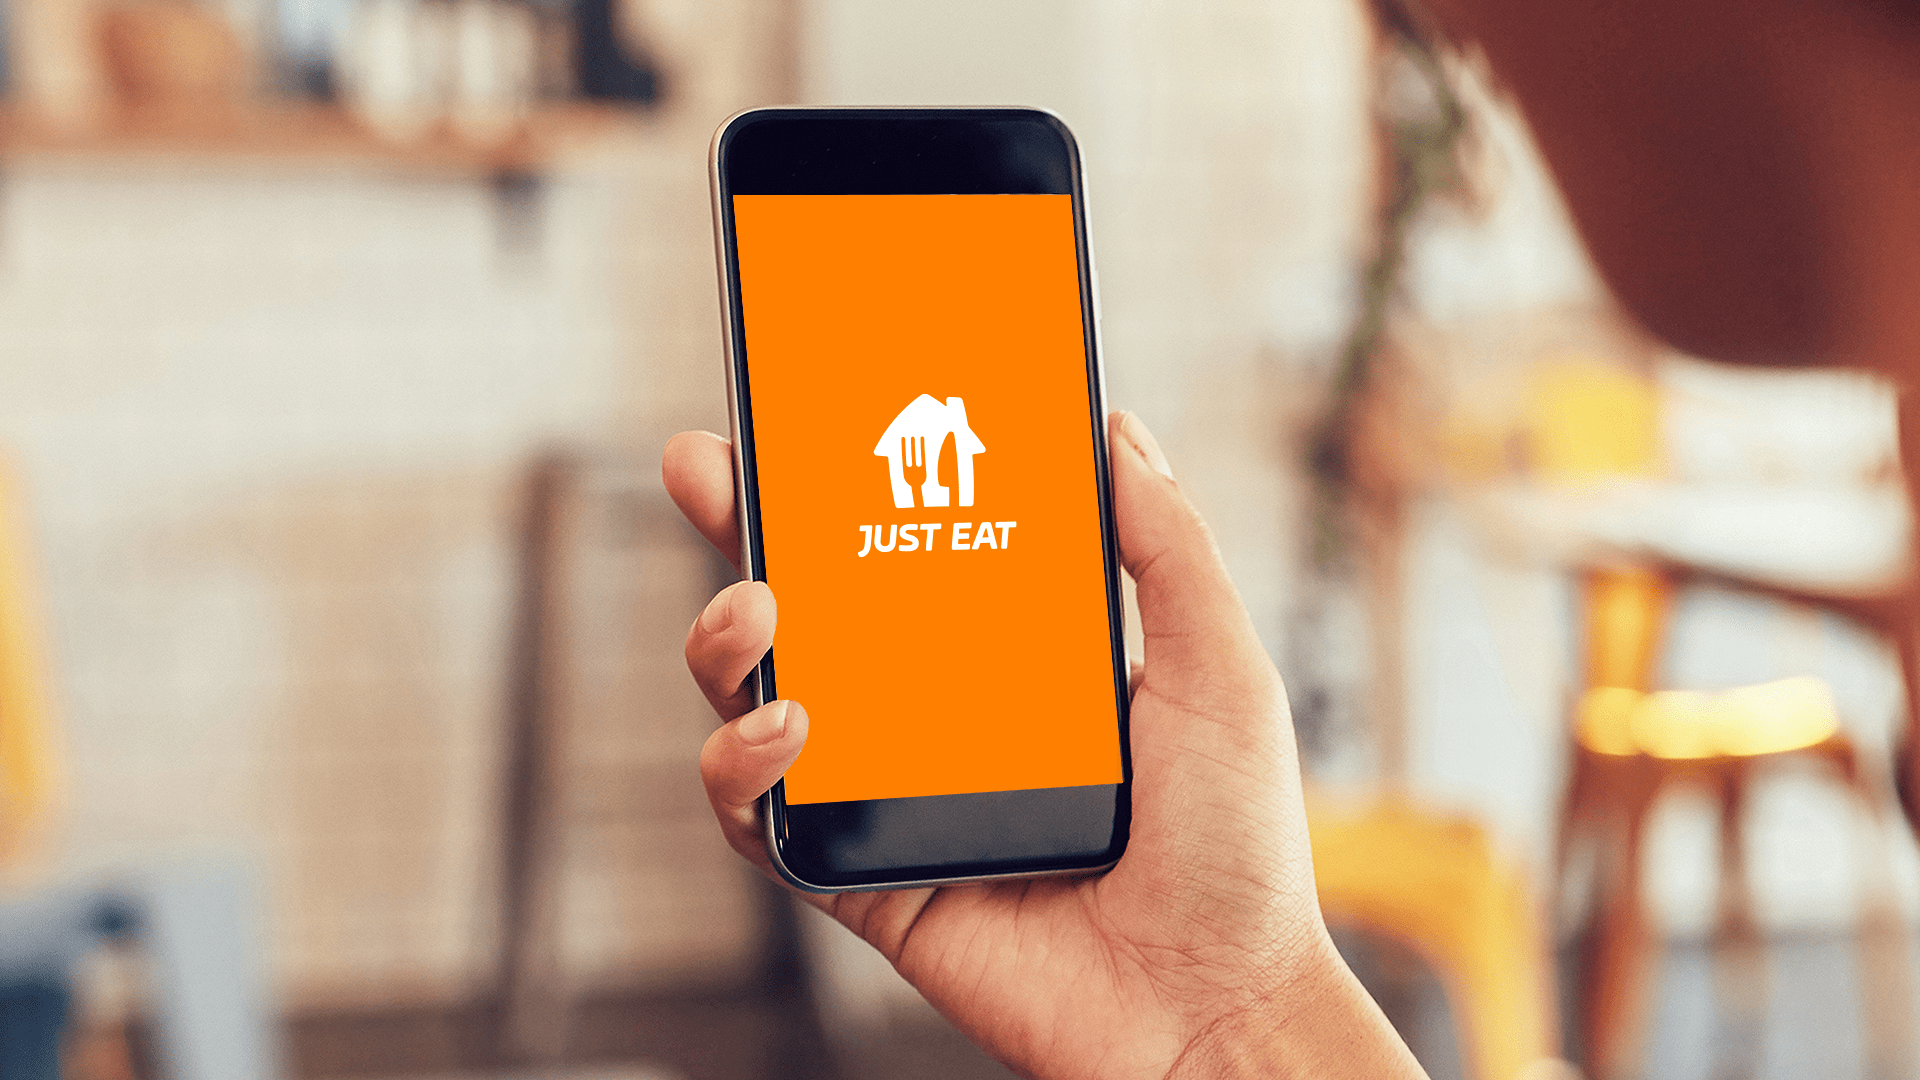 Just Eat UK to Replace Corporate Fleet With Electric Vehicles